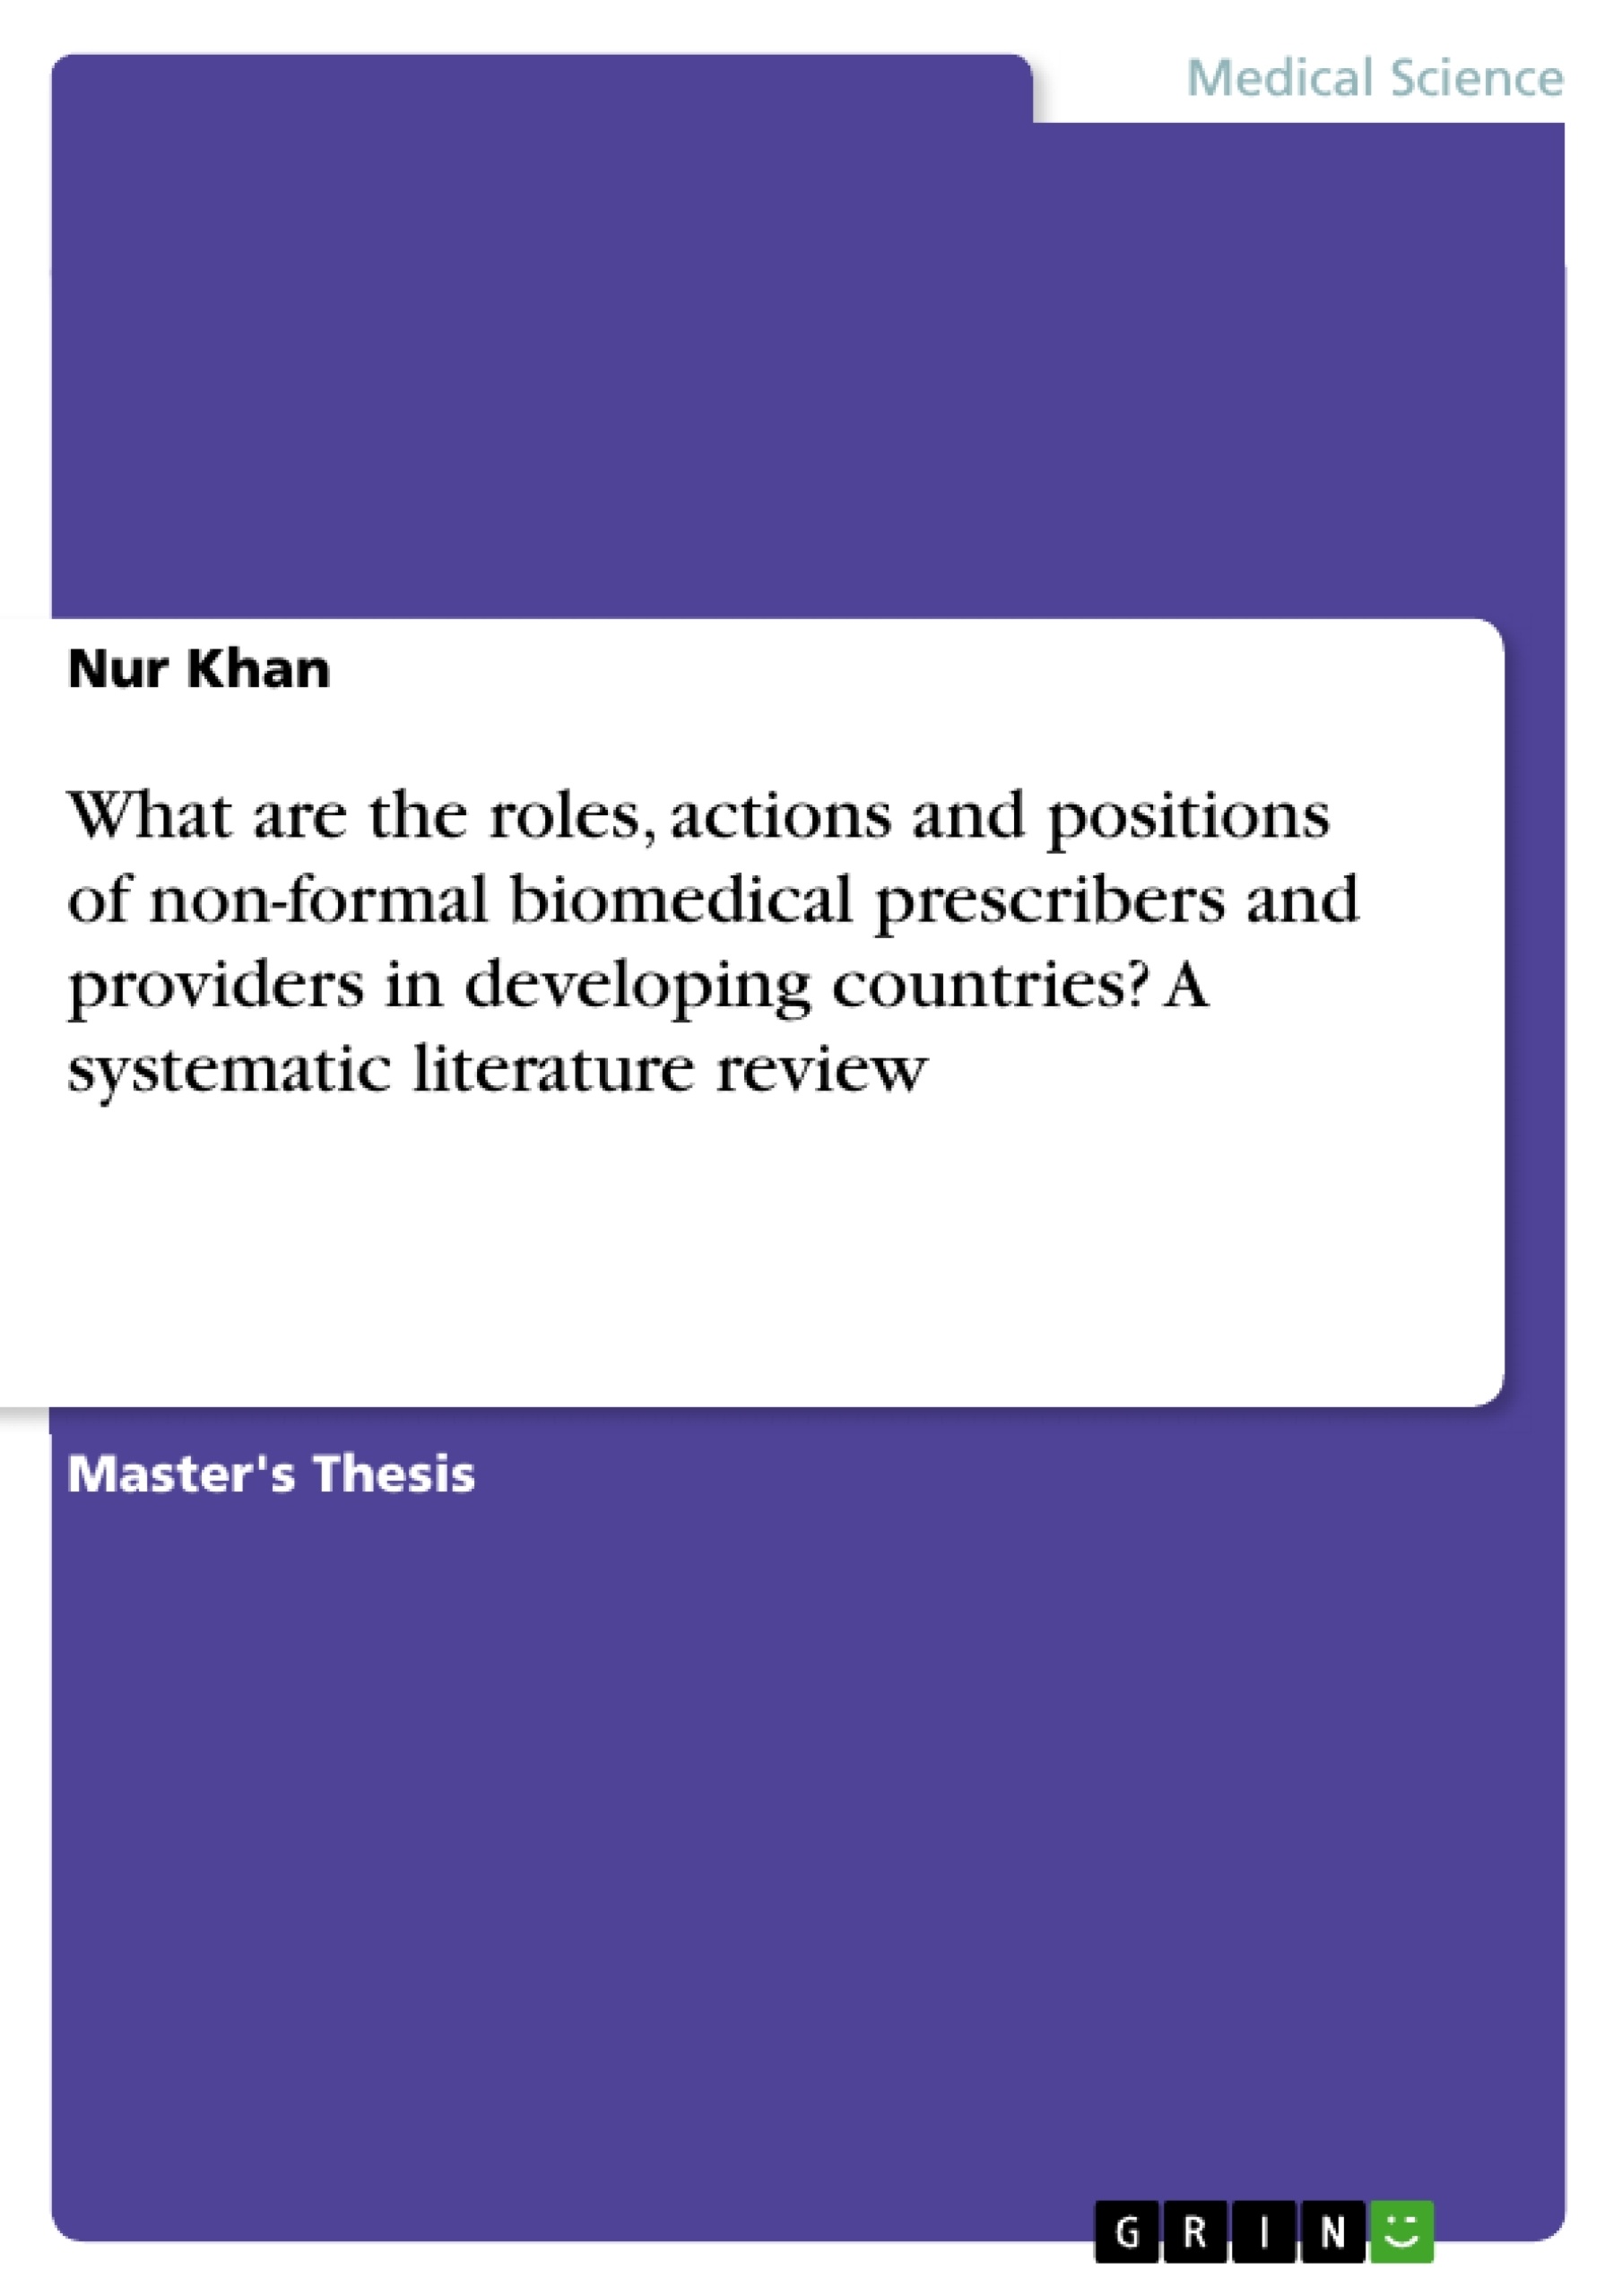 Title: What are the roles, actions and positions of non-formal biomedical prescribers and providers in developing countries? A systematic literature review